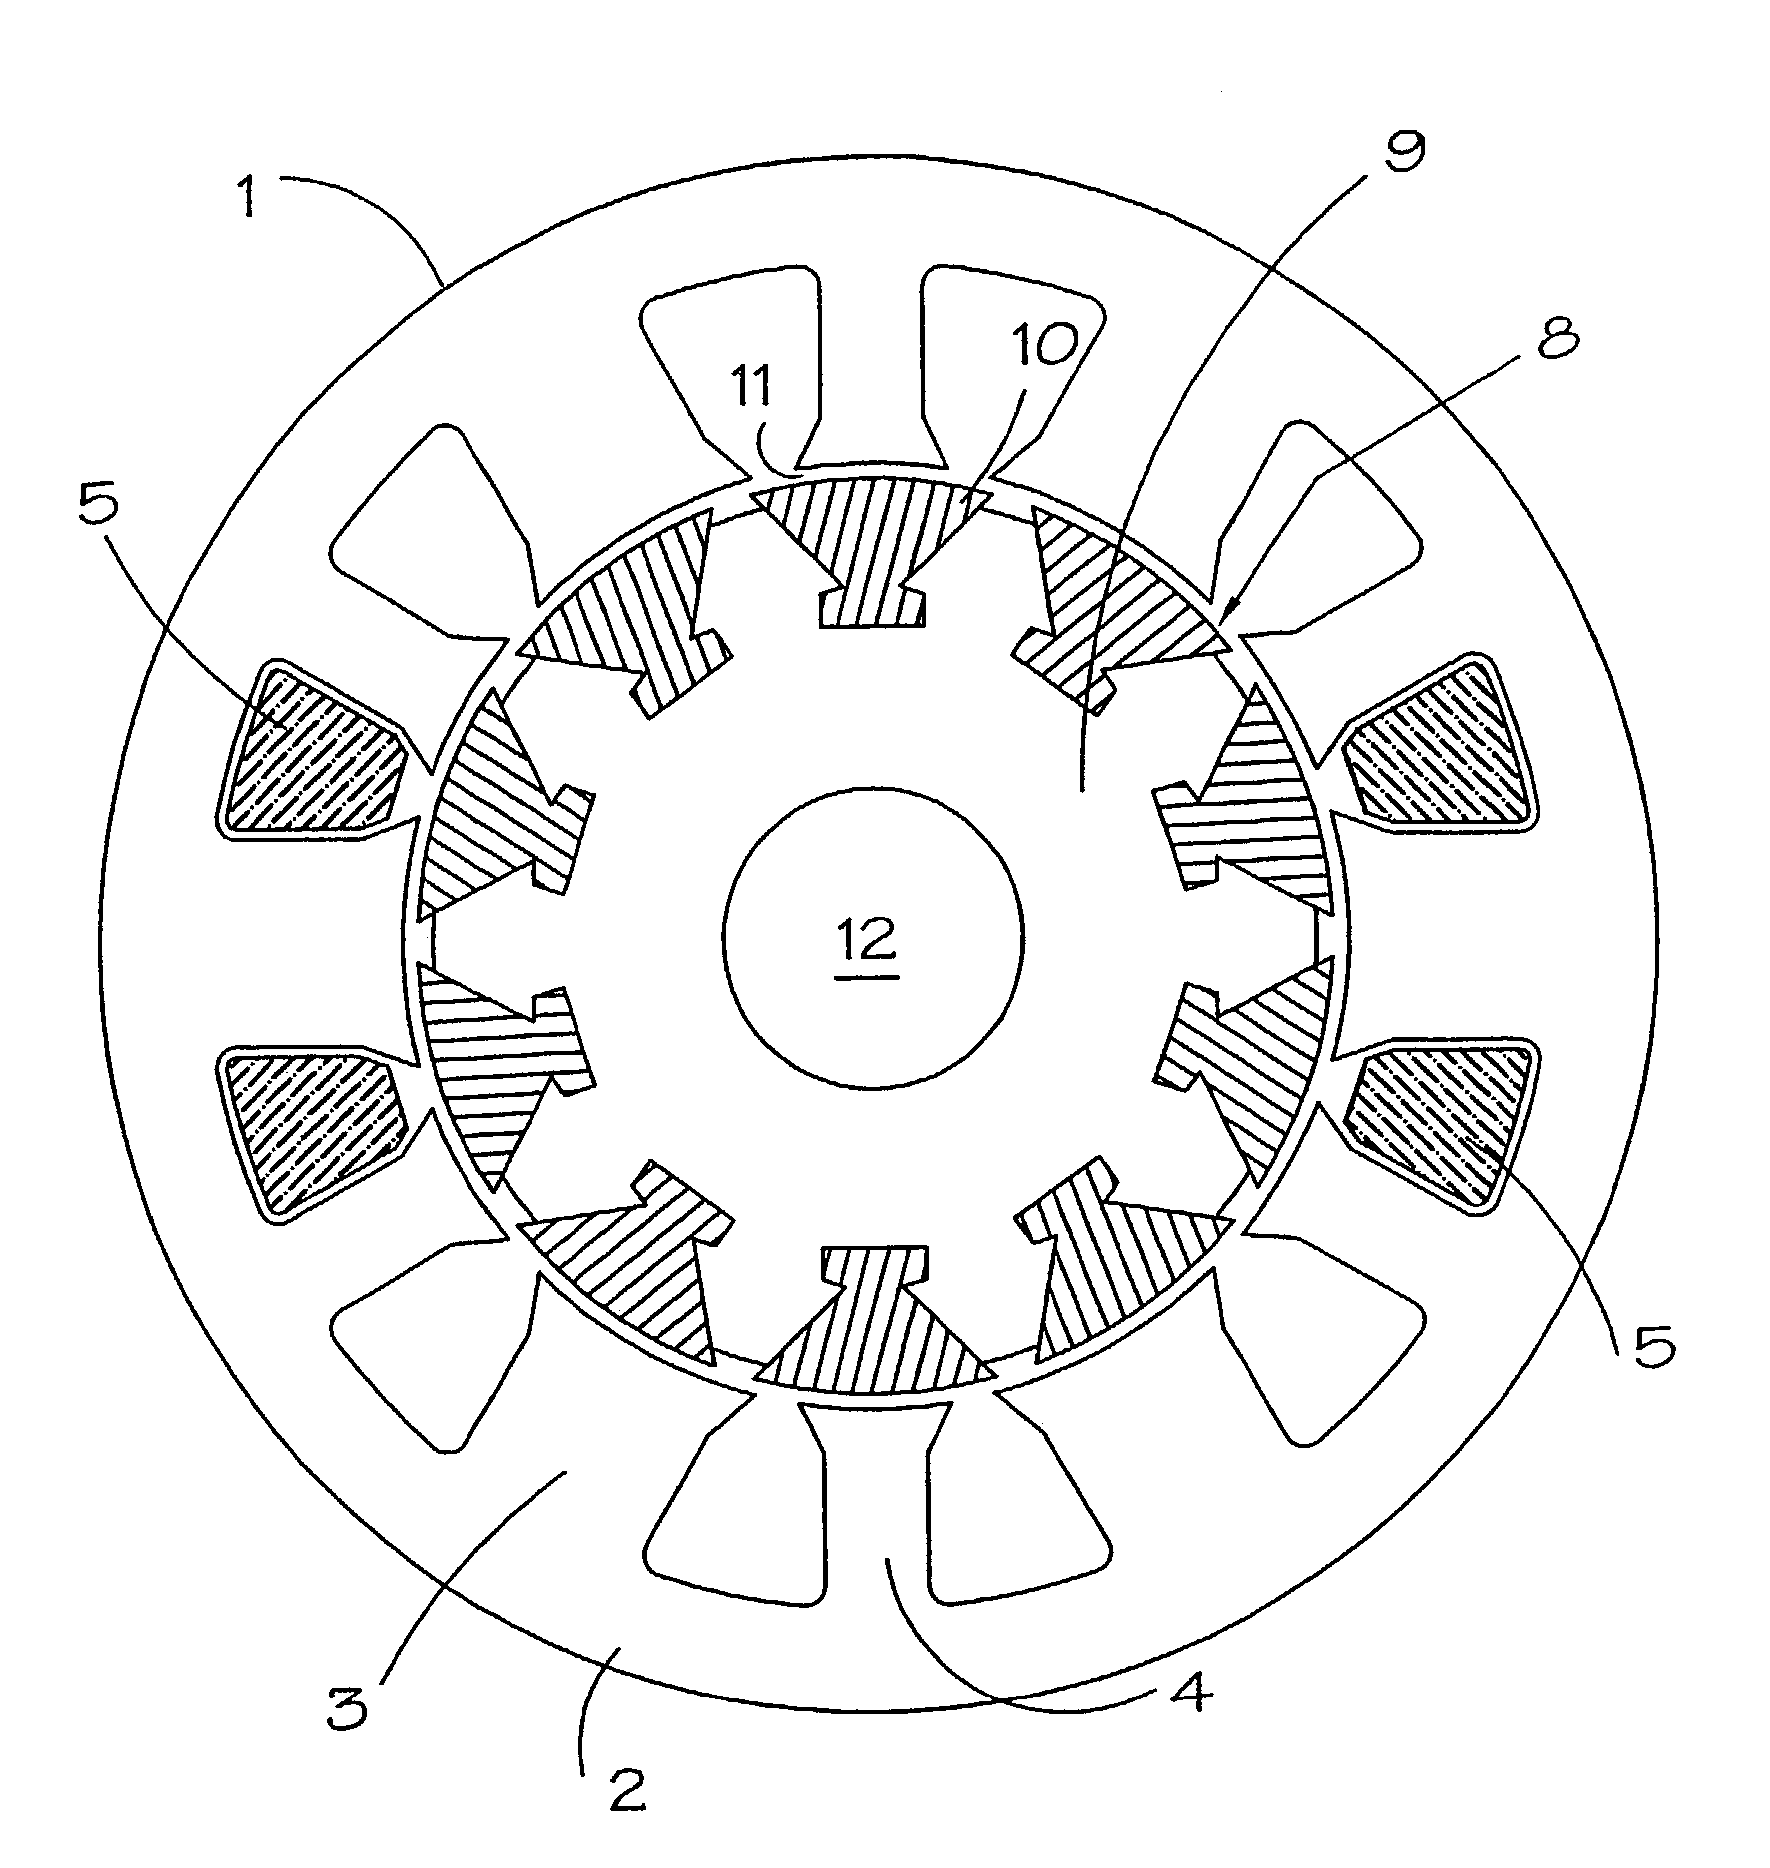 Control of a switched reluctance drive